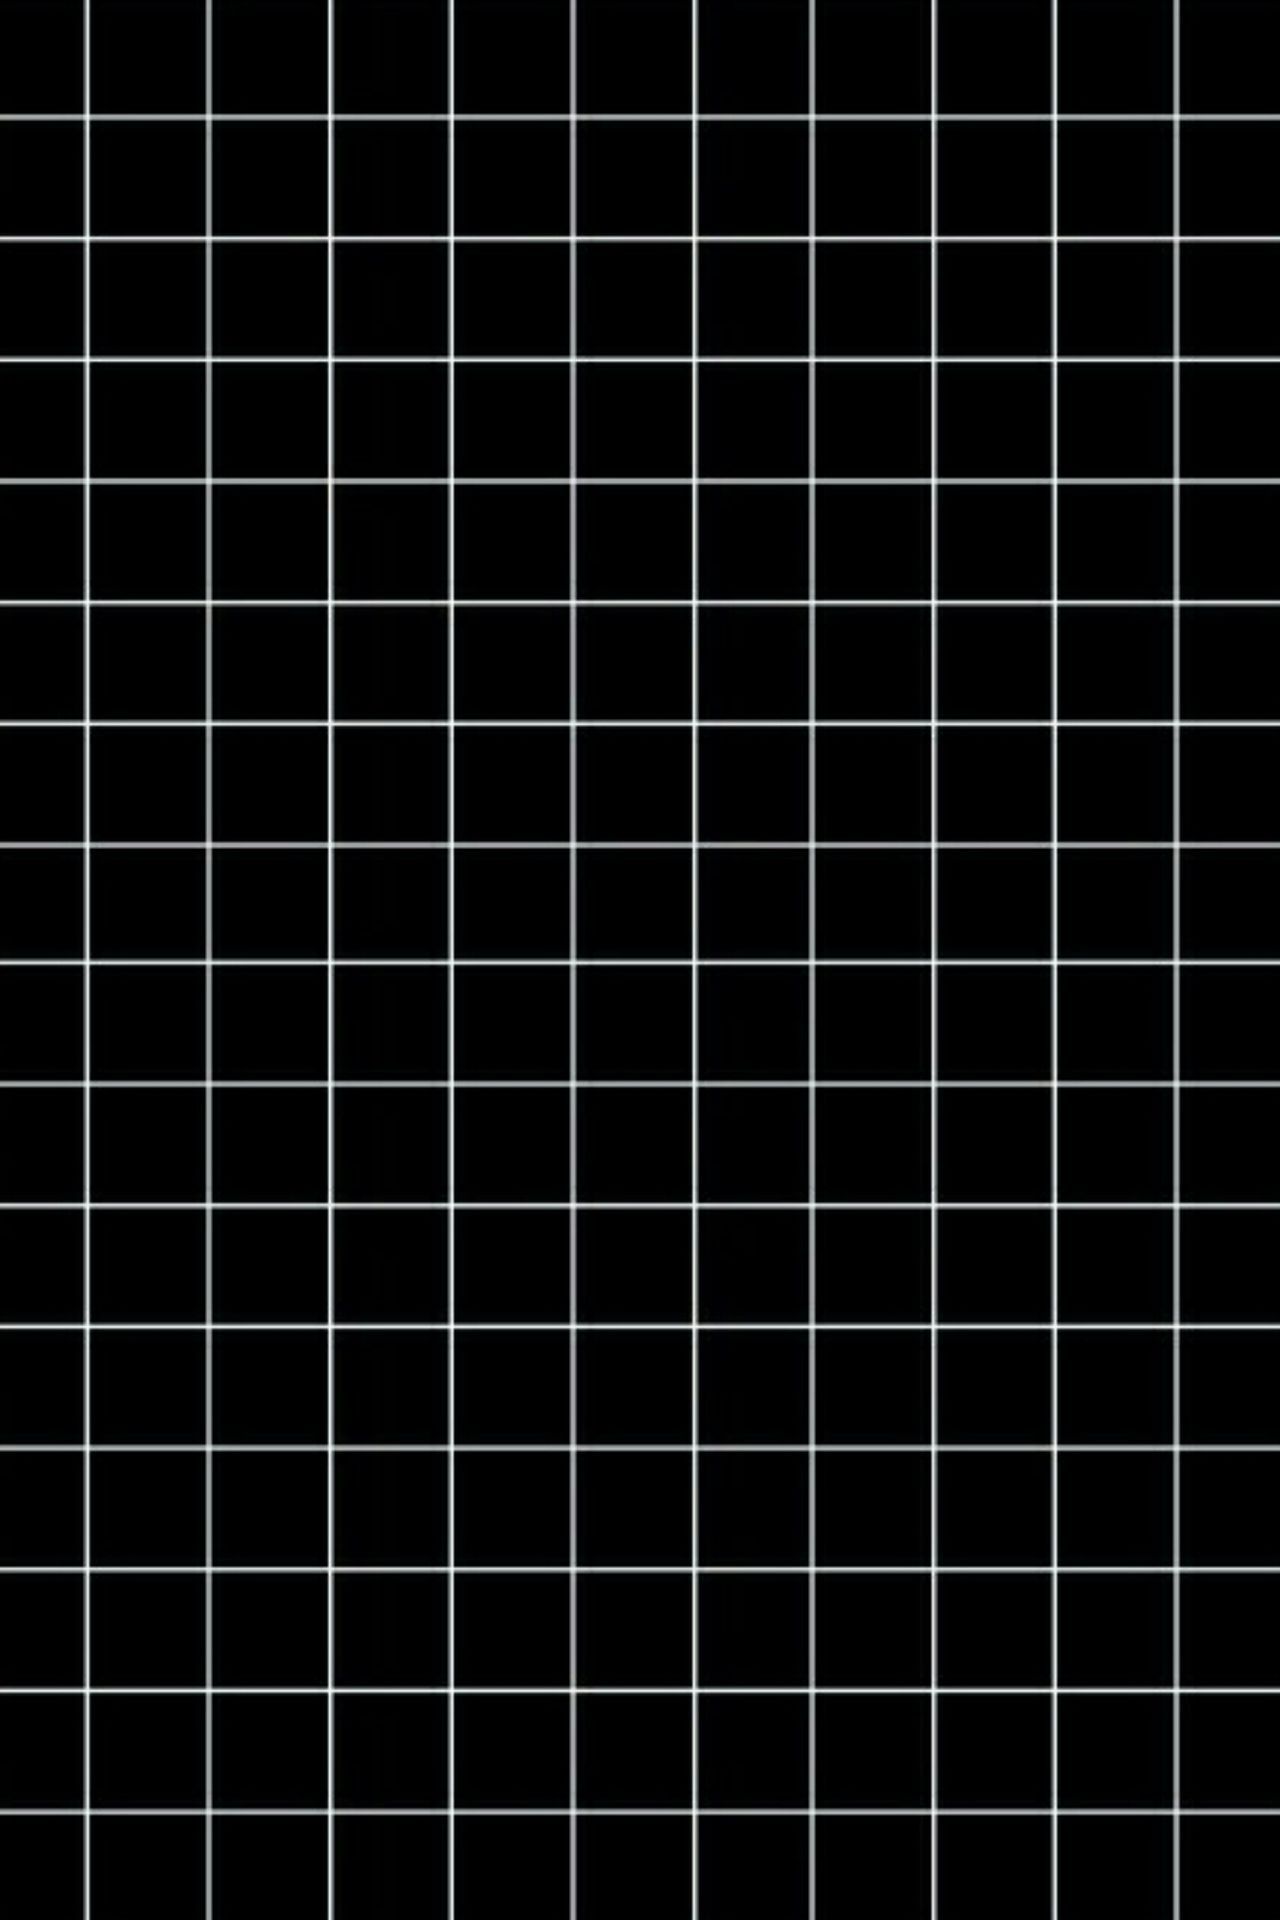 A black and white grid with squares - Grid